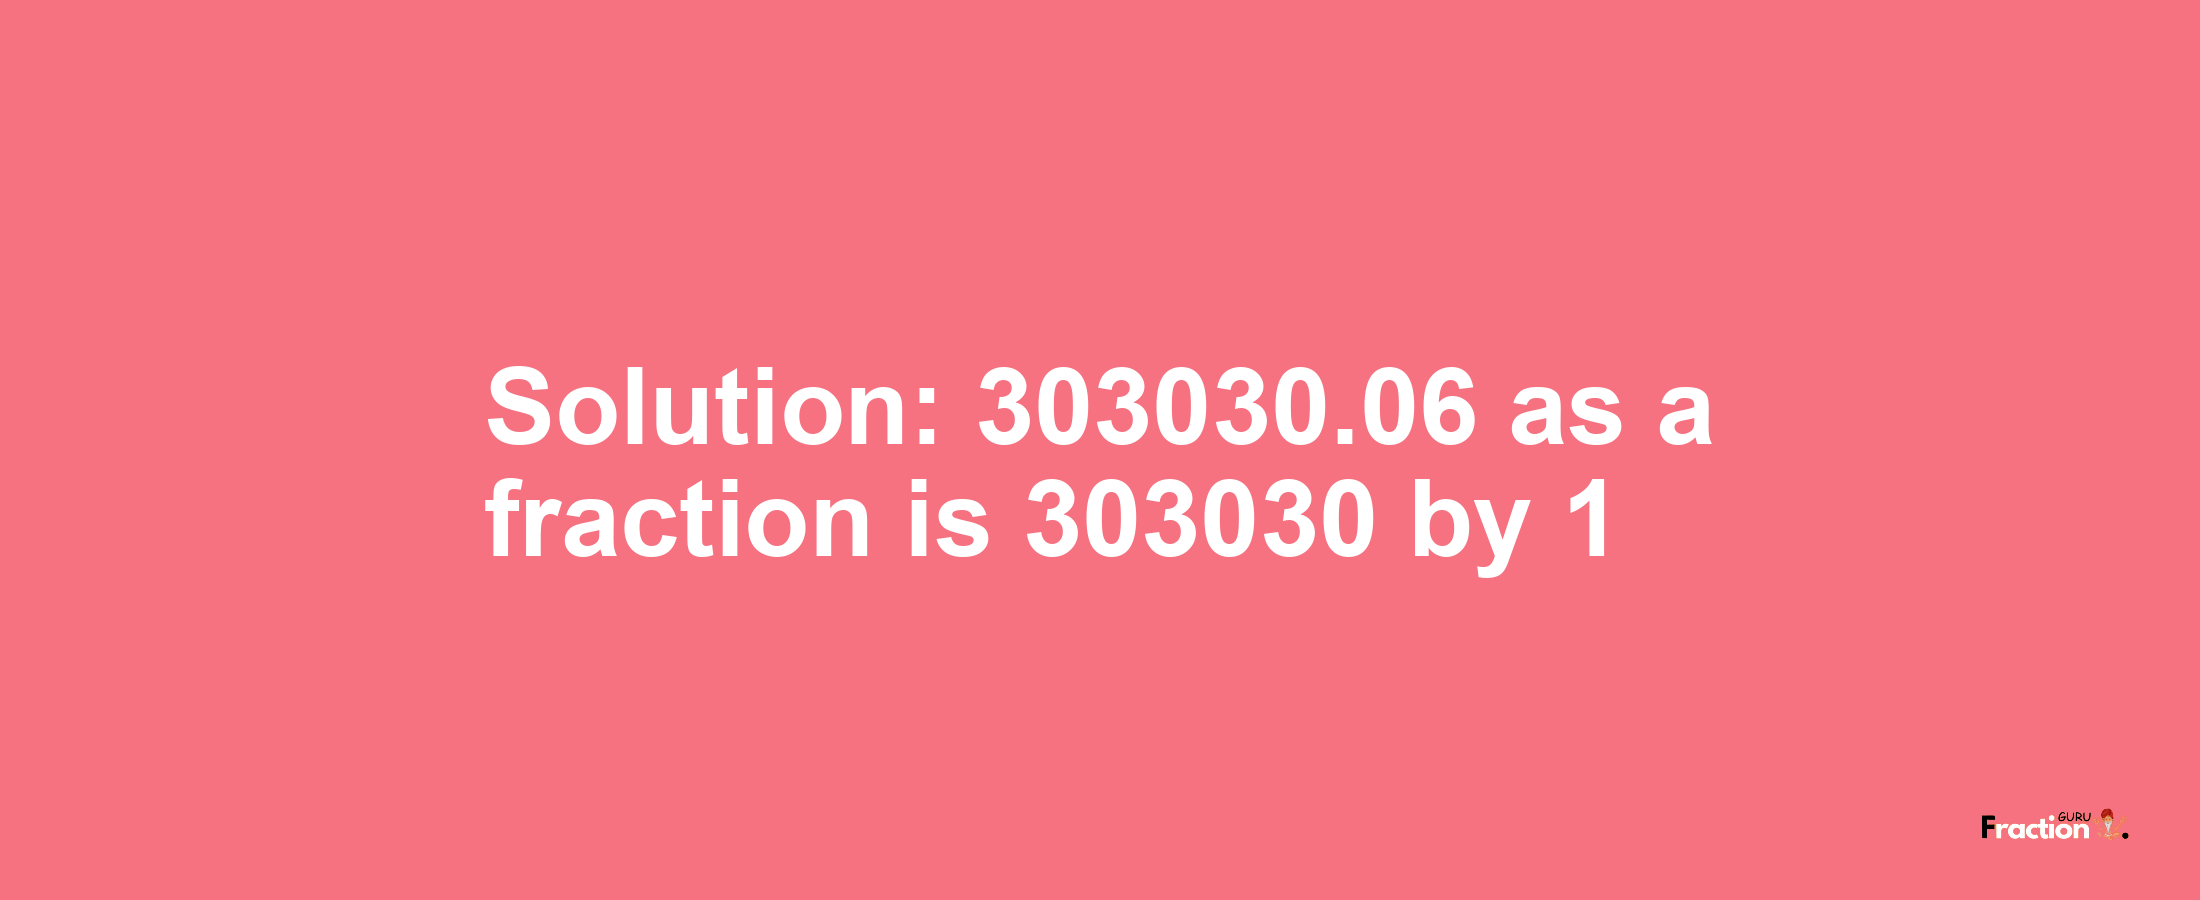 Solution:303030.06 as a fraction is 303030/1